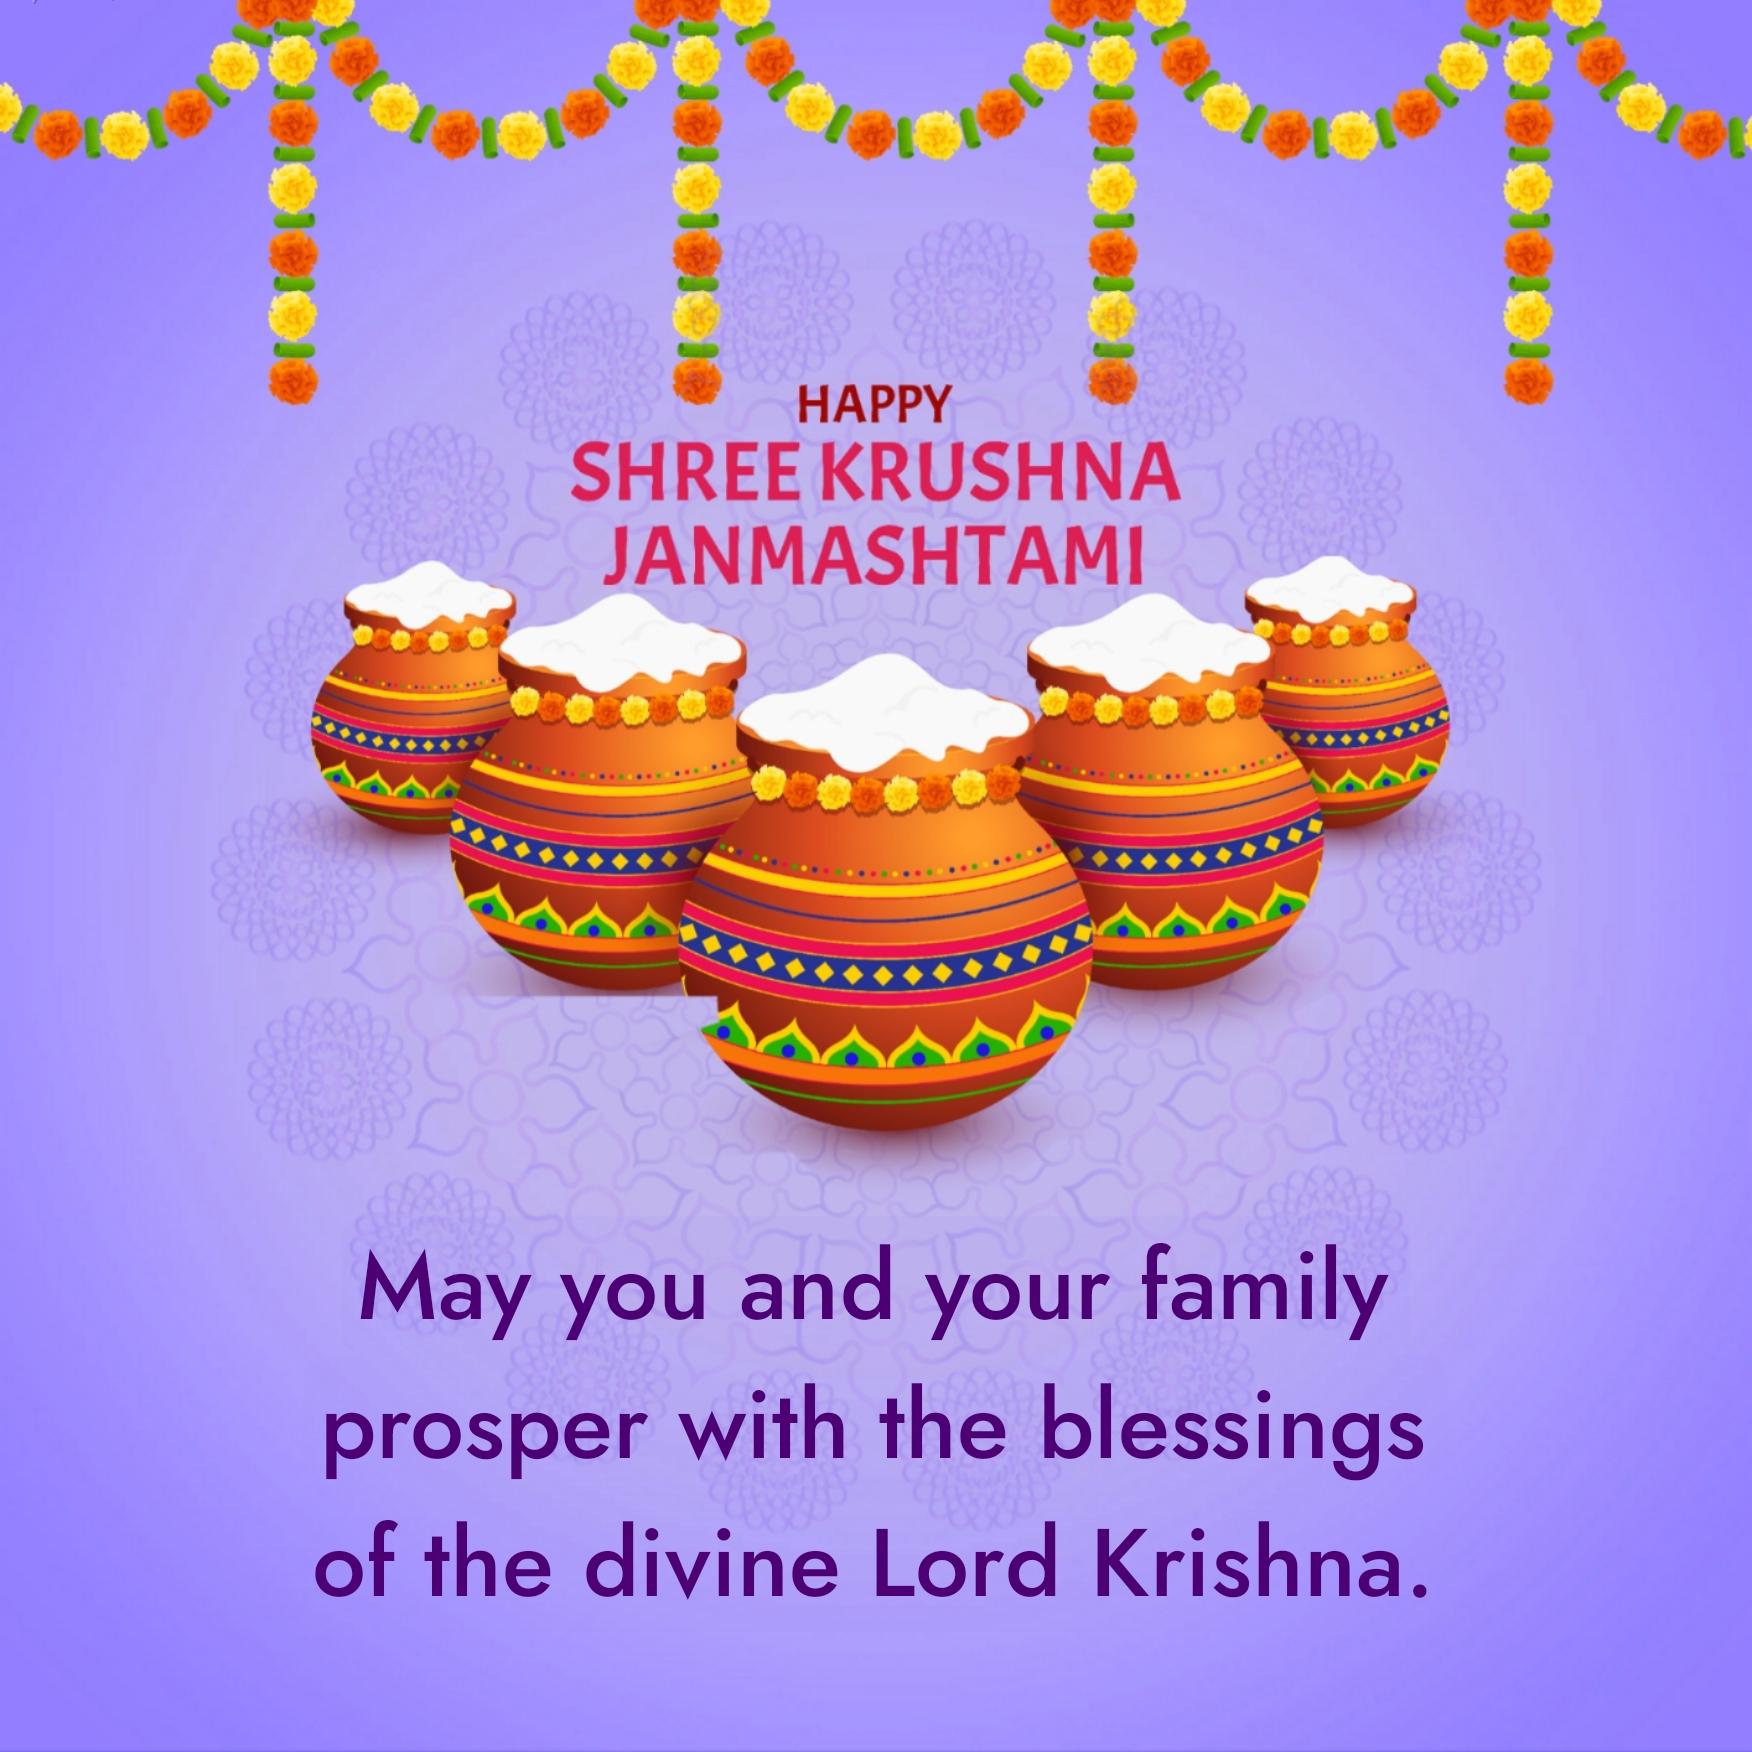 May you and your family prosper with the blessings